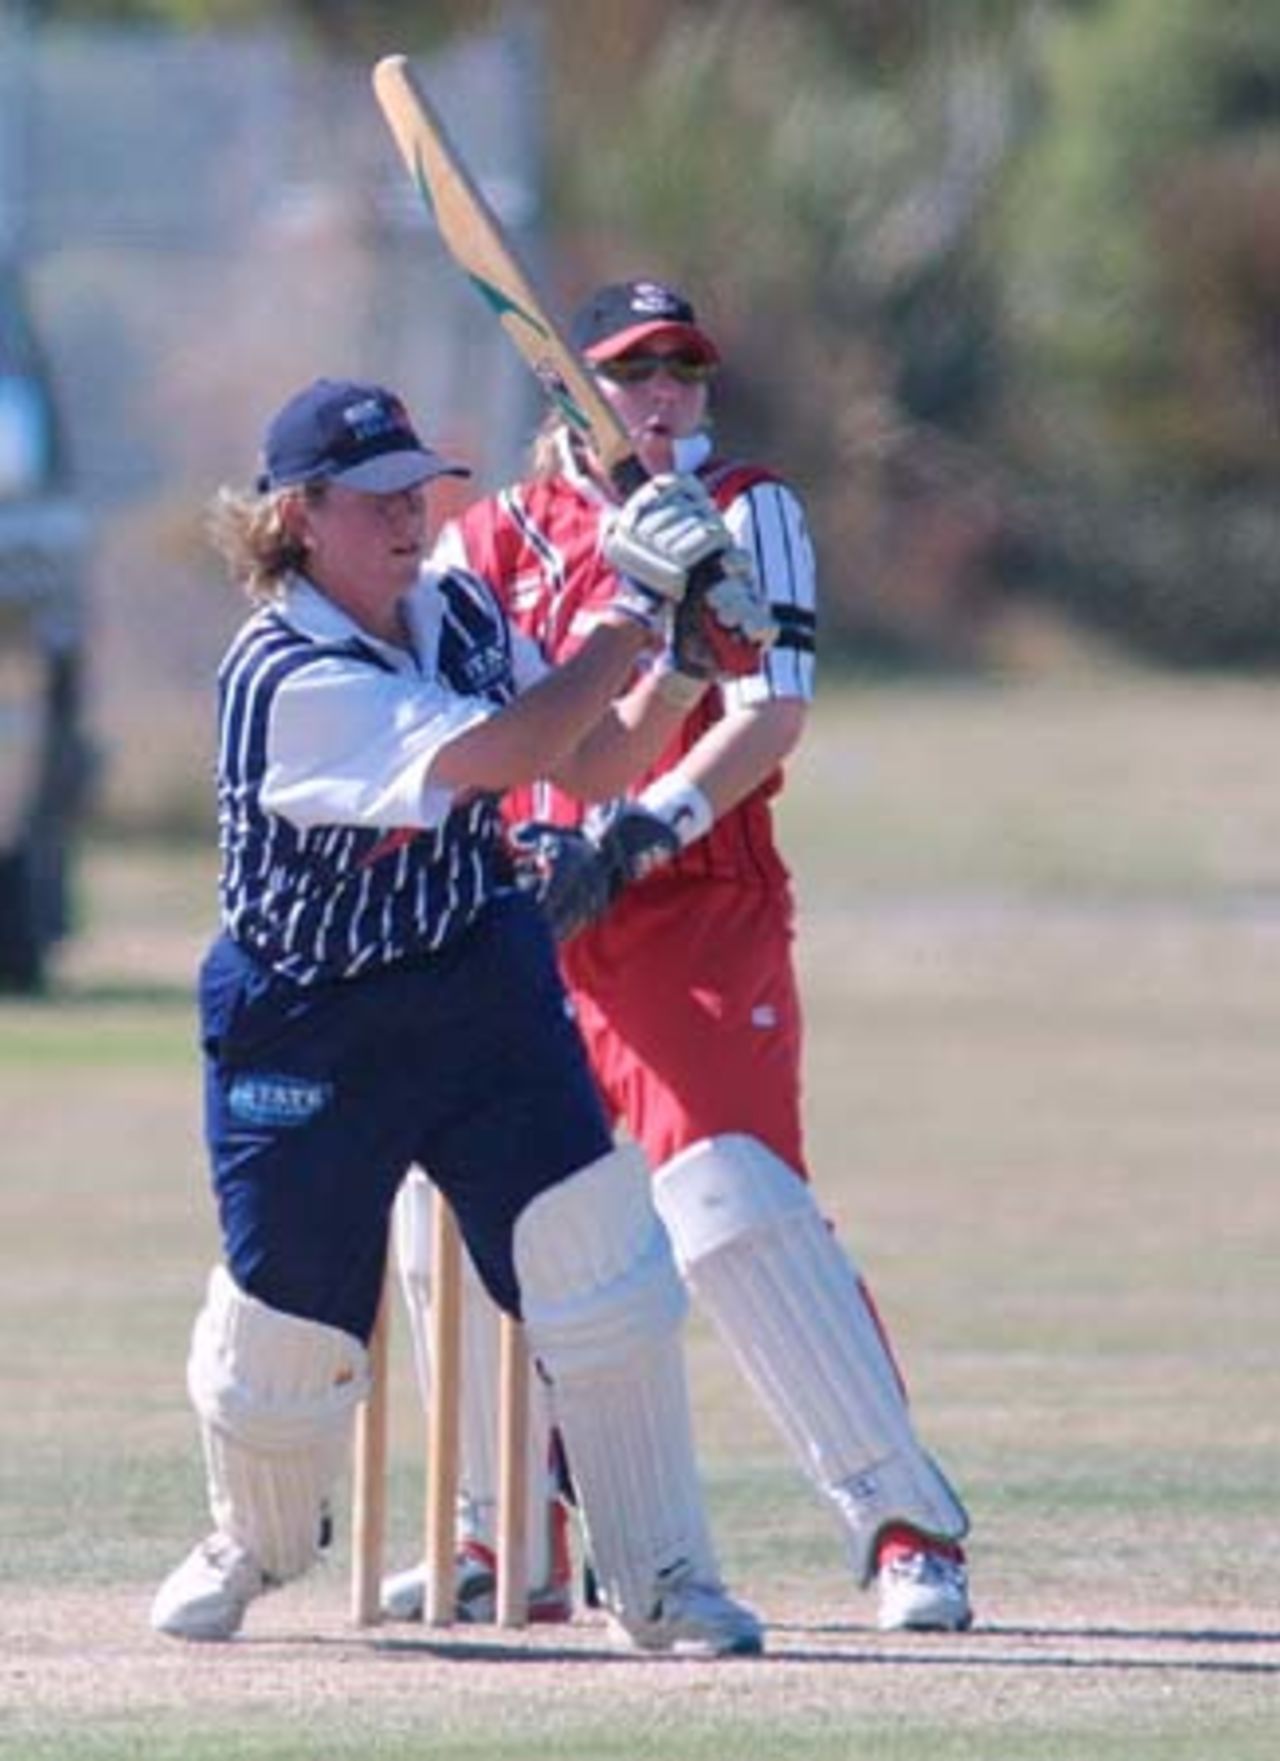 Auckland opening batsman Shelly Fruin swings a ball away through forward square leg during her innings of 97 while Canterbury wicket-keeper Jo Strachan looks on. State Insurance Cup Final: Canterbury Women v Auckland Women at Village Green, Christchurch, 10 February 2001.